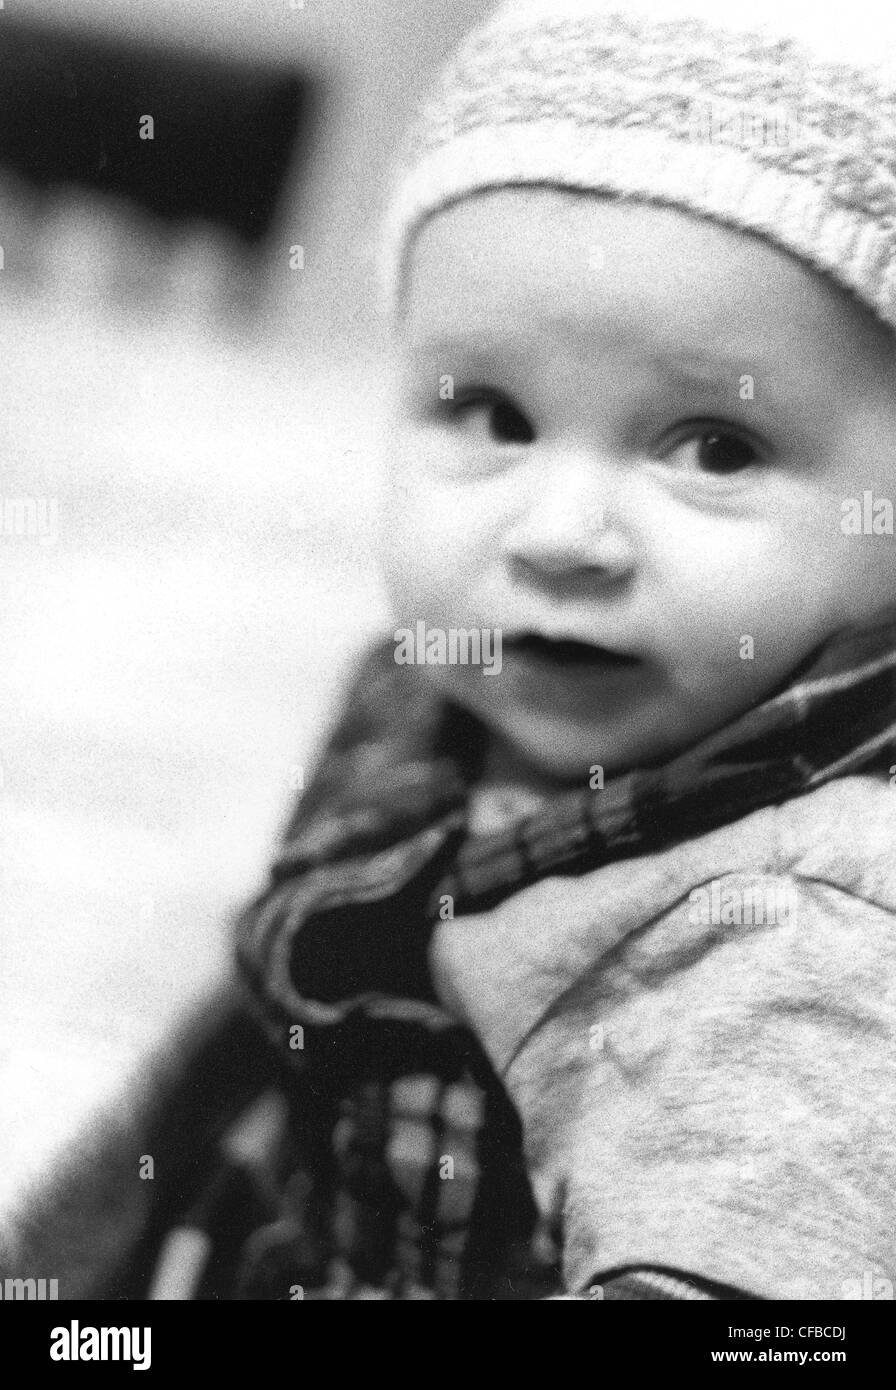 'FACES OF ALFI' Baby wearing knitted hat serious expression Stock Photo